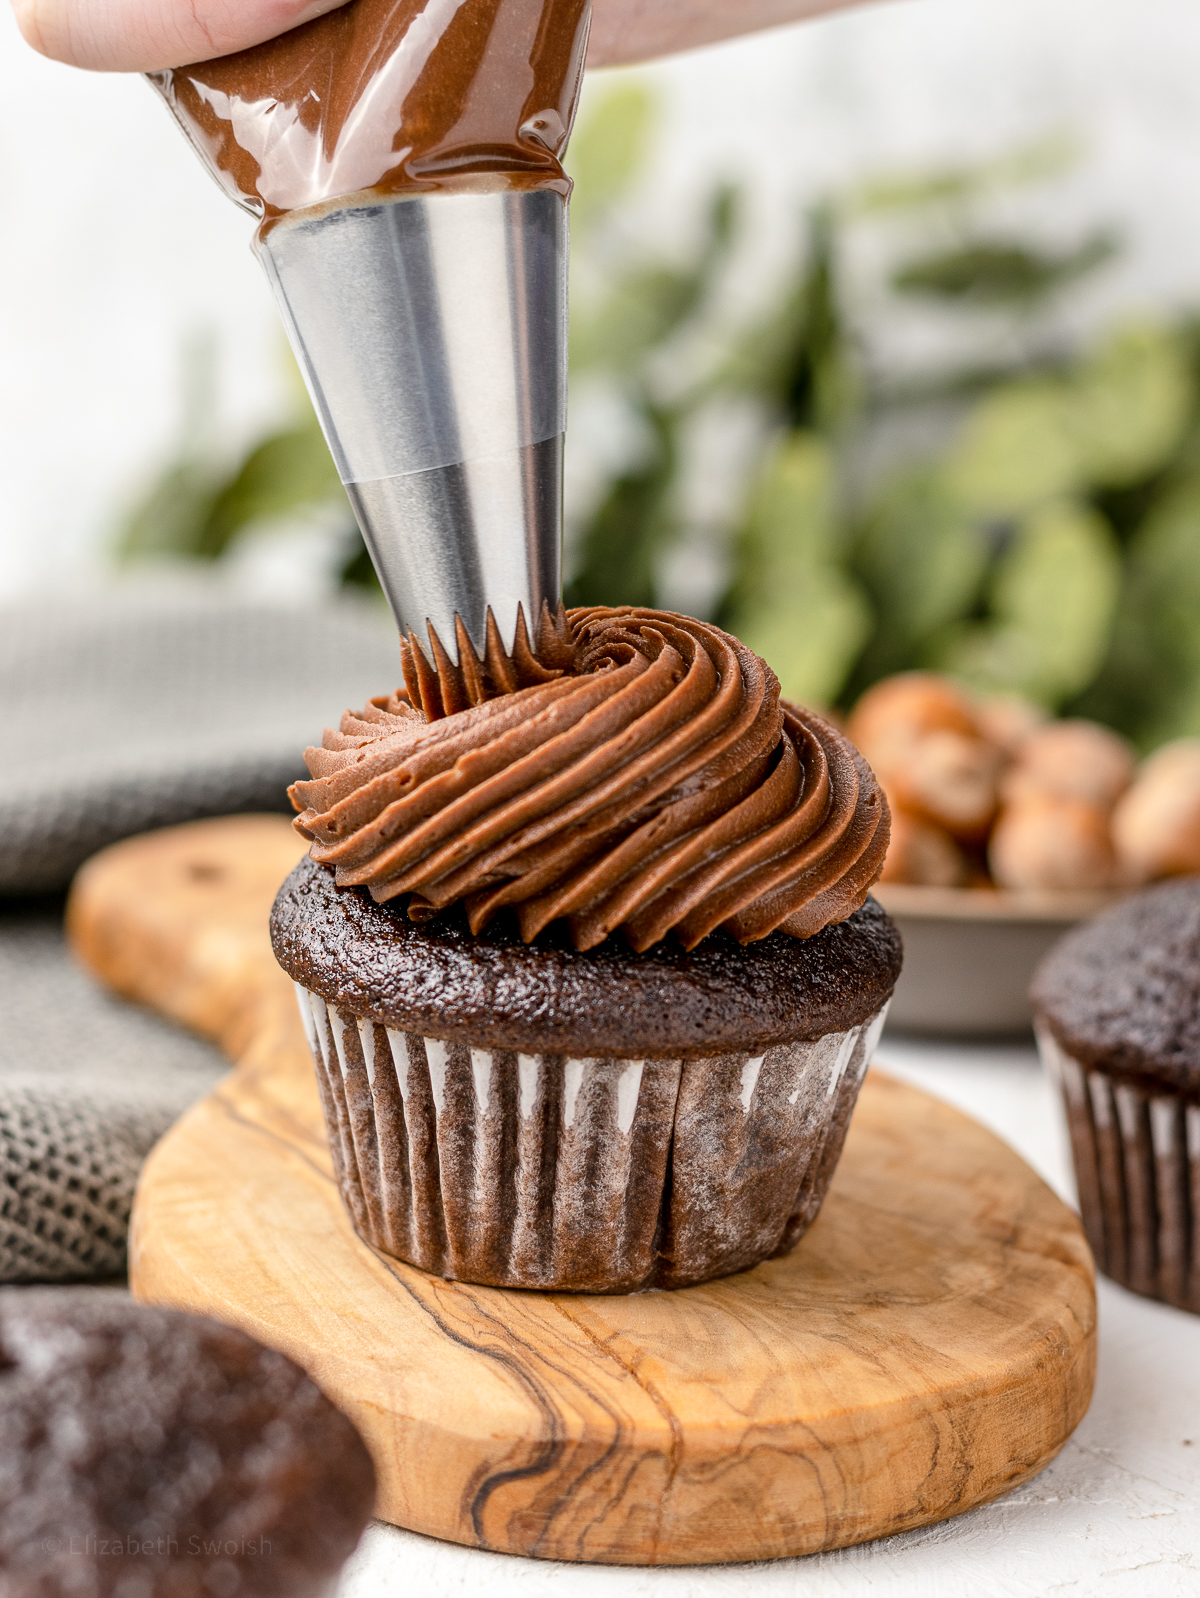 Piping chocolate Nutella buttercream onto a Nutella filled cupcake.